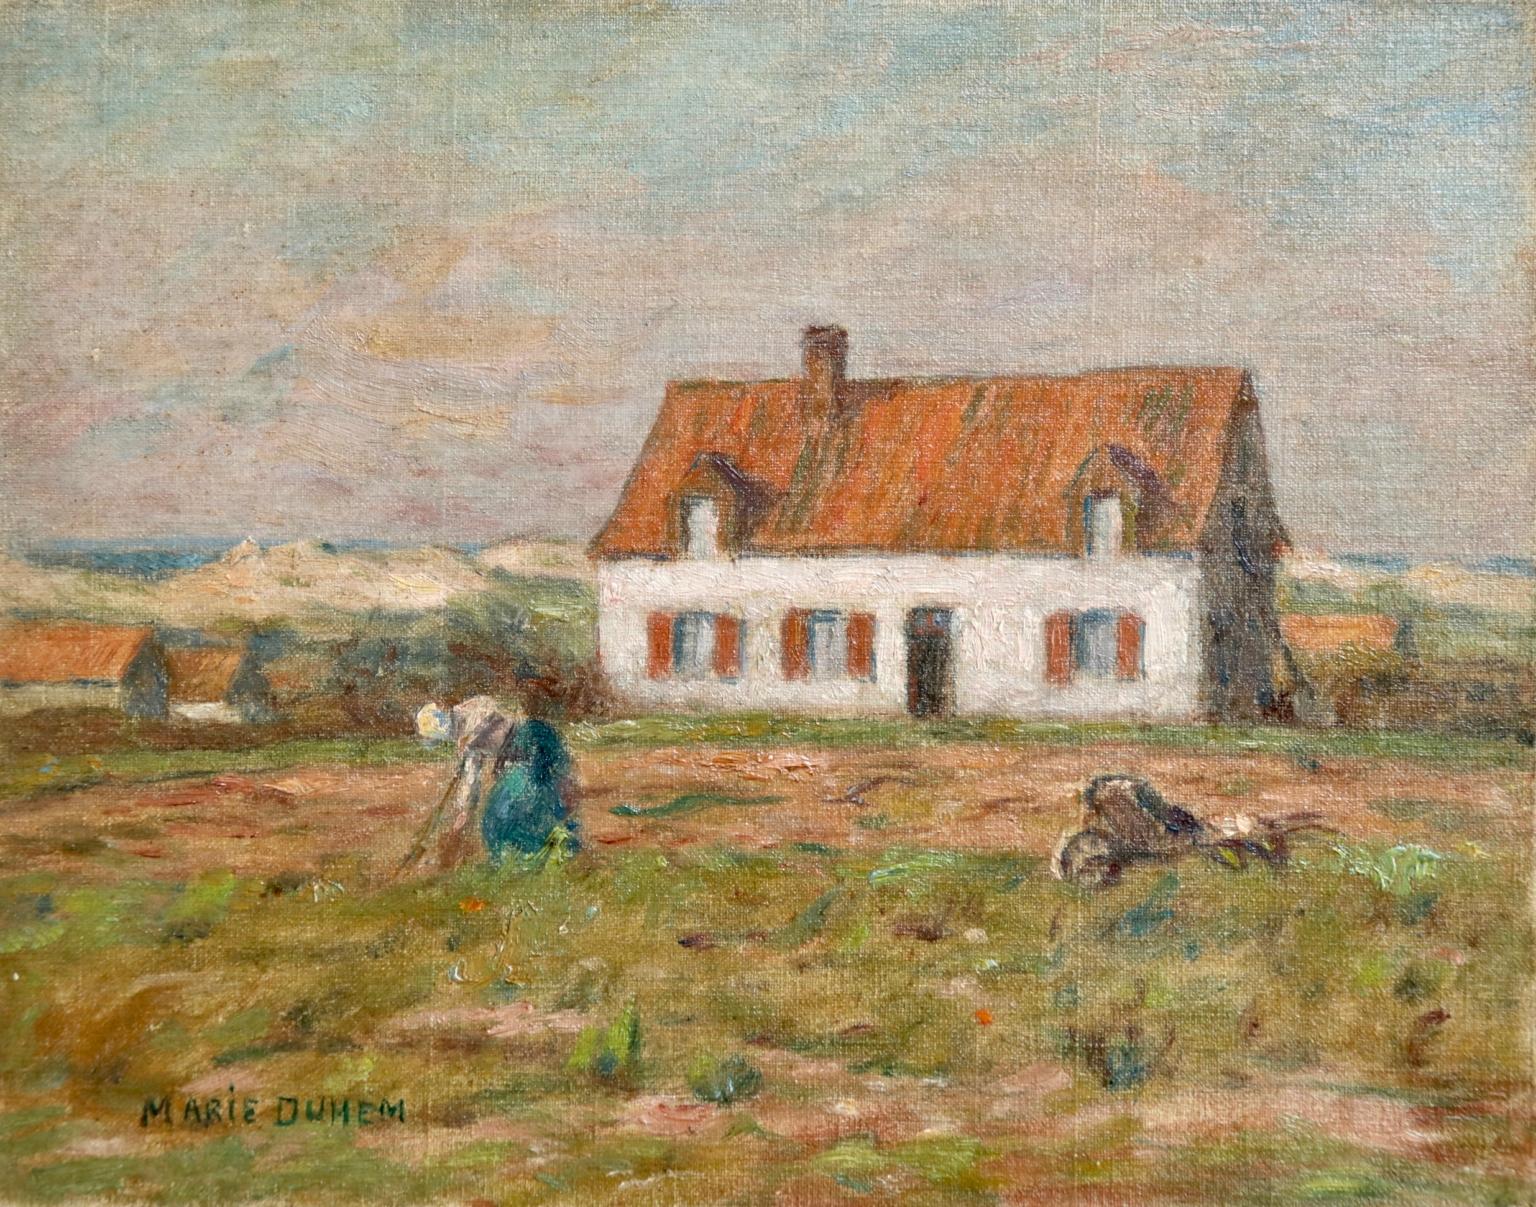 A beautiful oil on board circa 1905 by French impressionist painter Marie Duhem depicting a woman tending to her vegetable patch in front of a house. Signed lower left.

Dimensions:
Unframed: 7.5"x9.5"
This painting is not currently framed but a